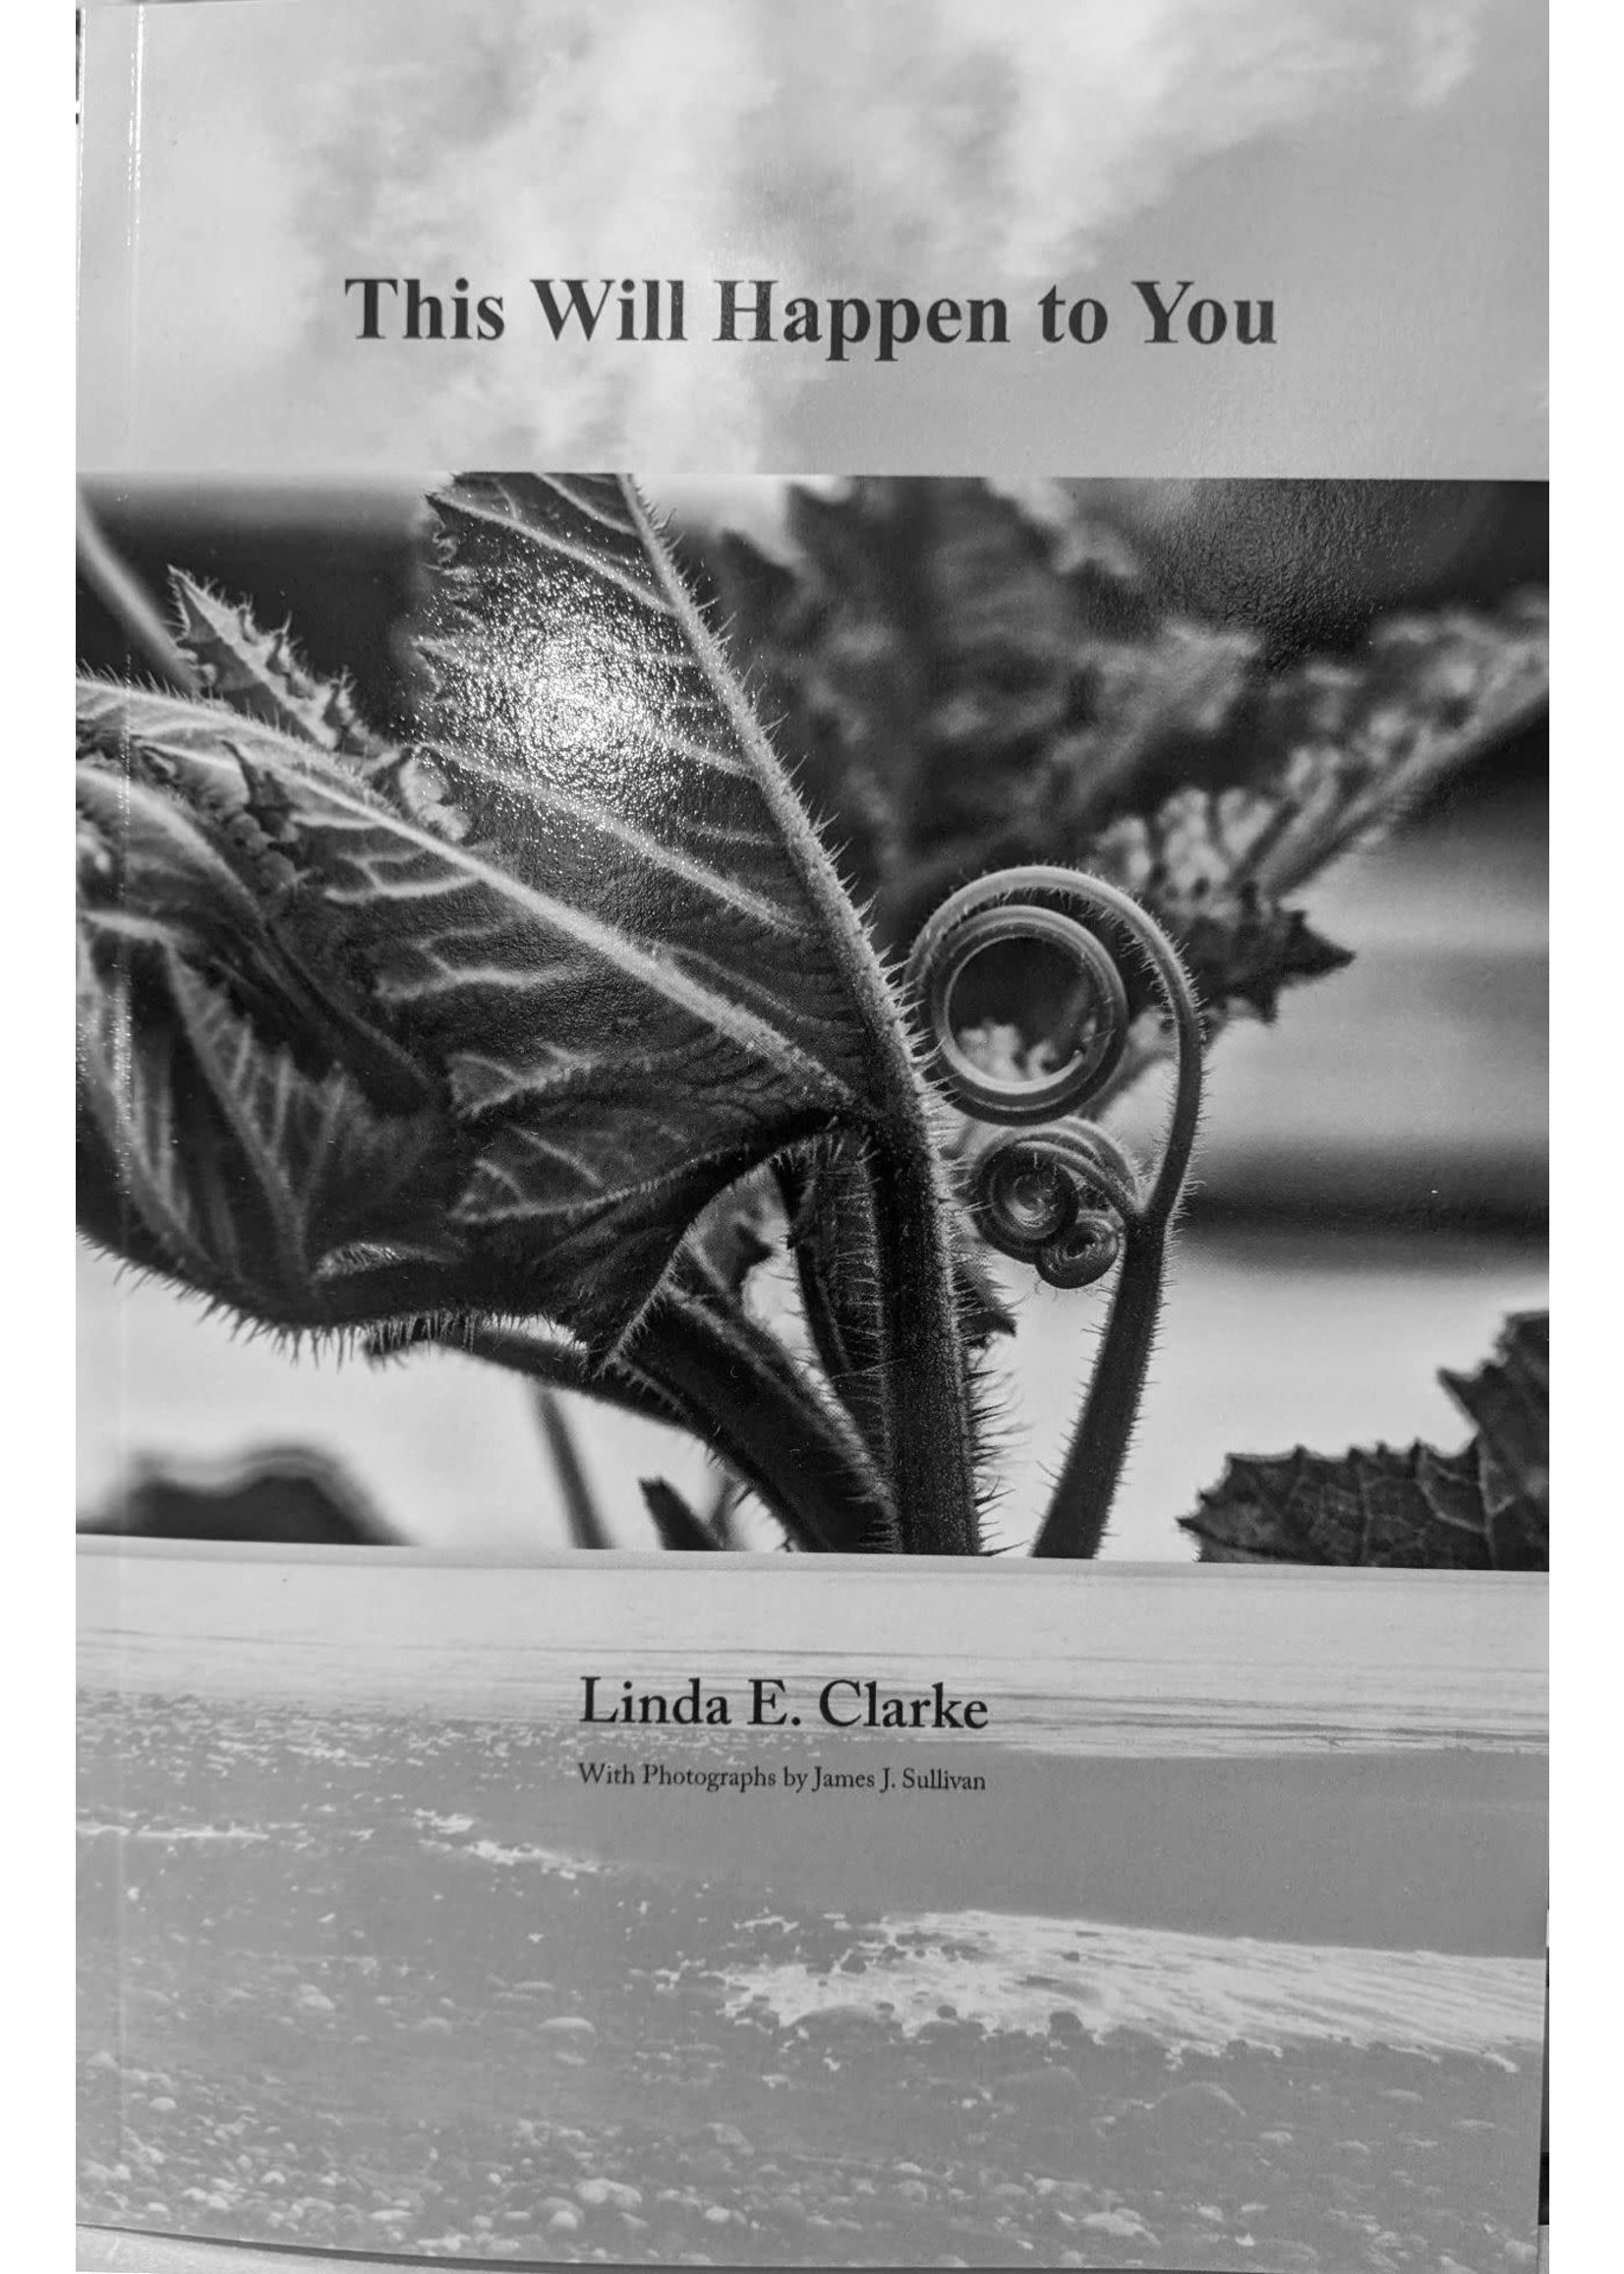 This Will Happen to You by Linda E. Clarke